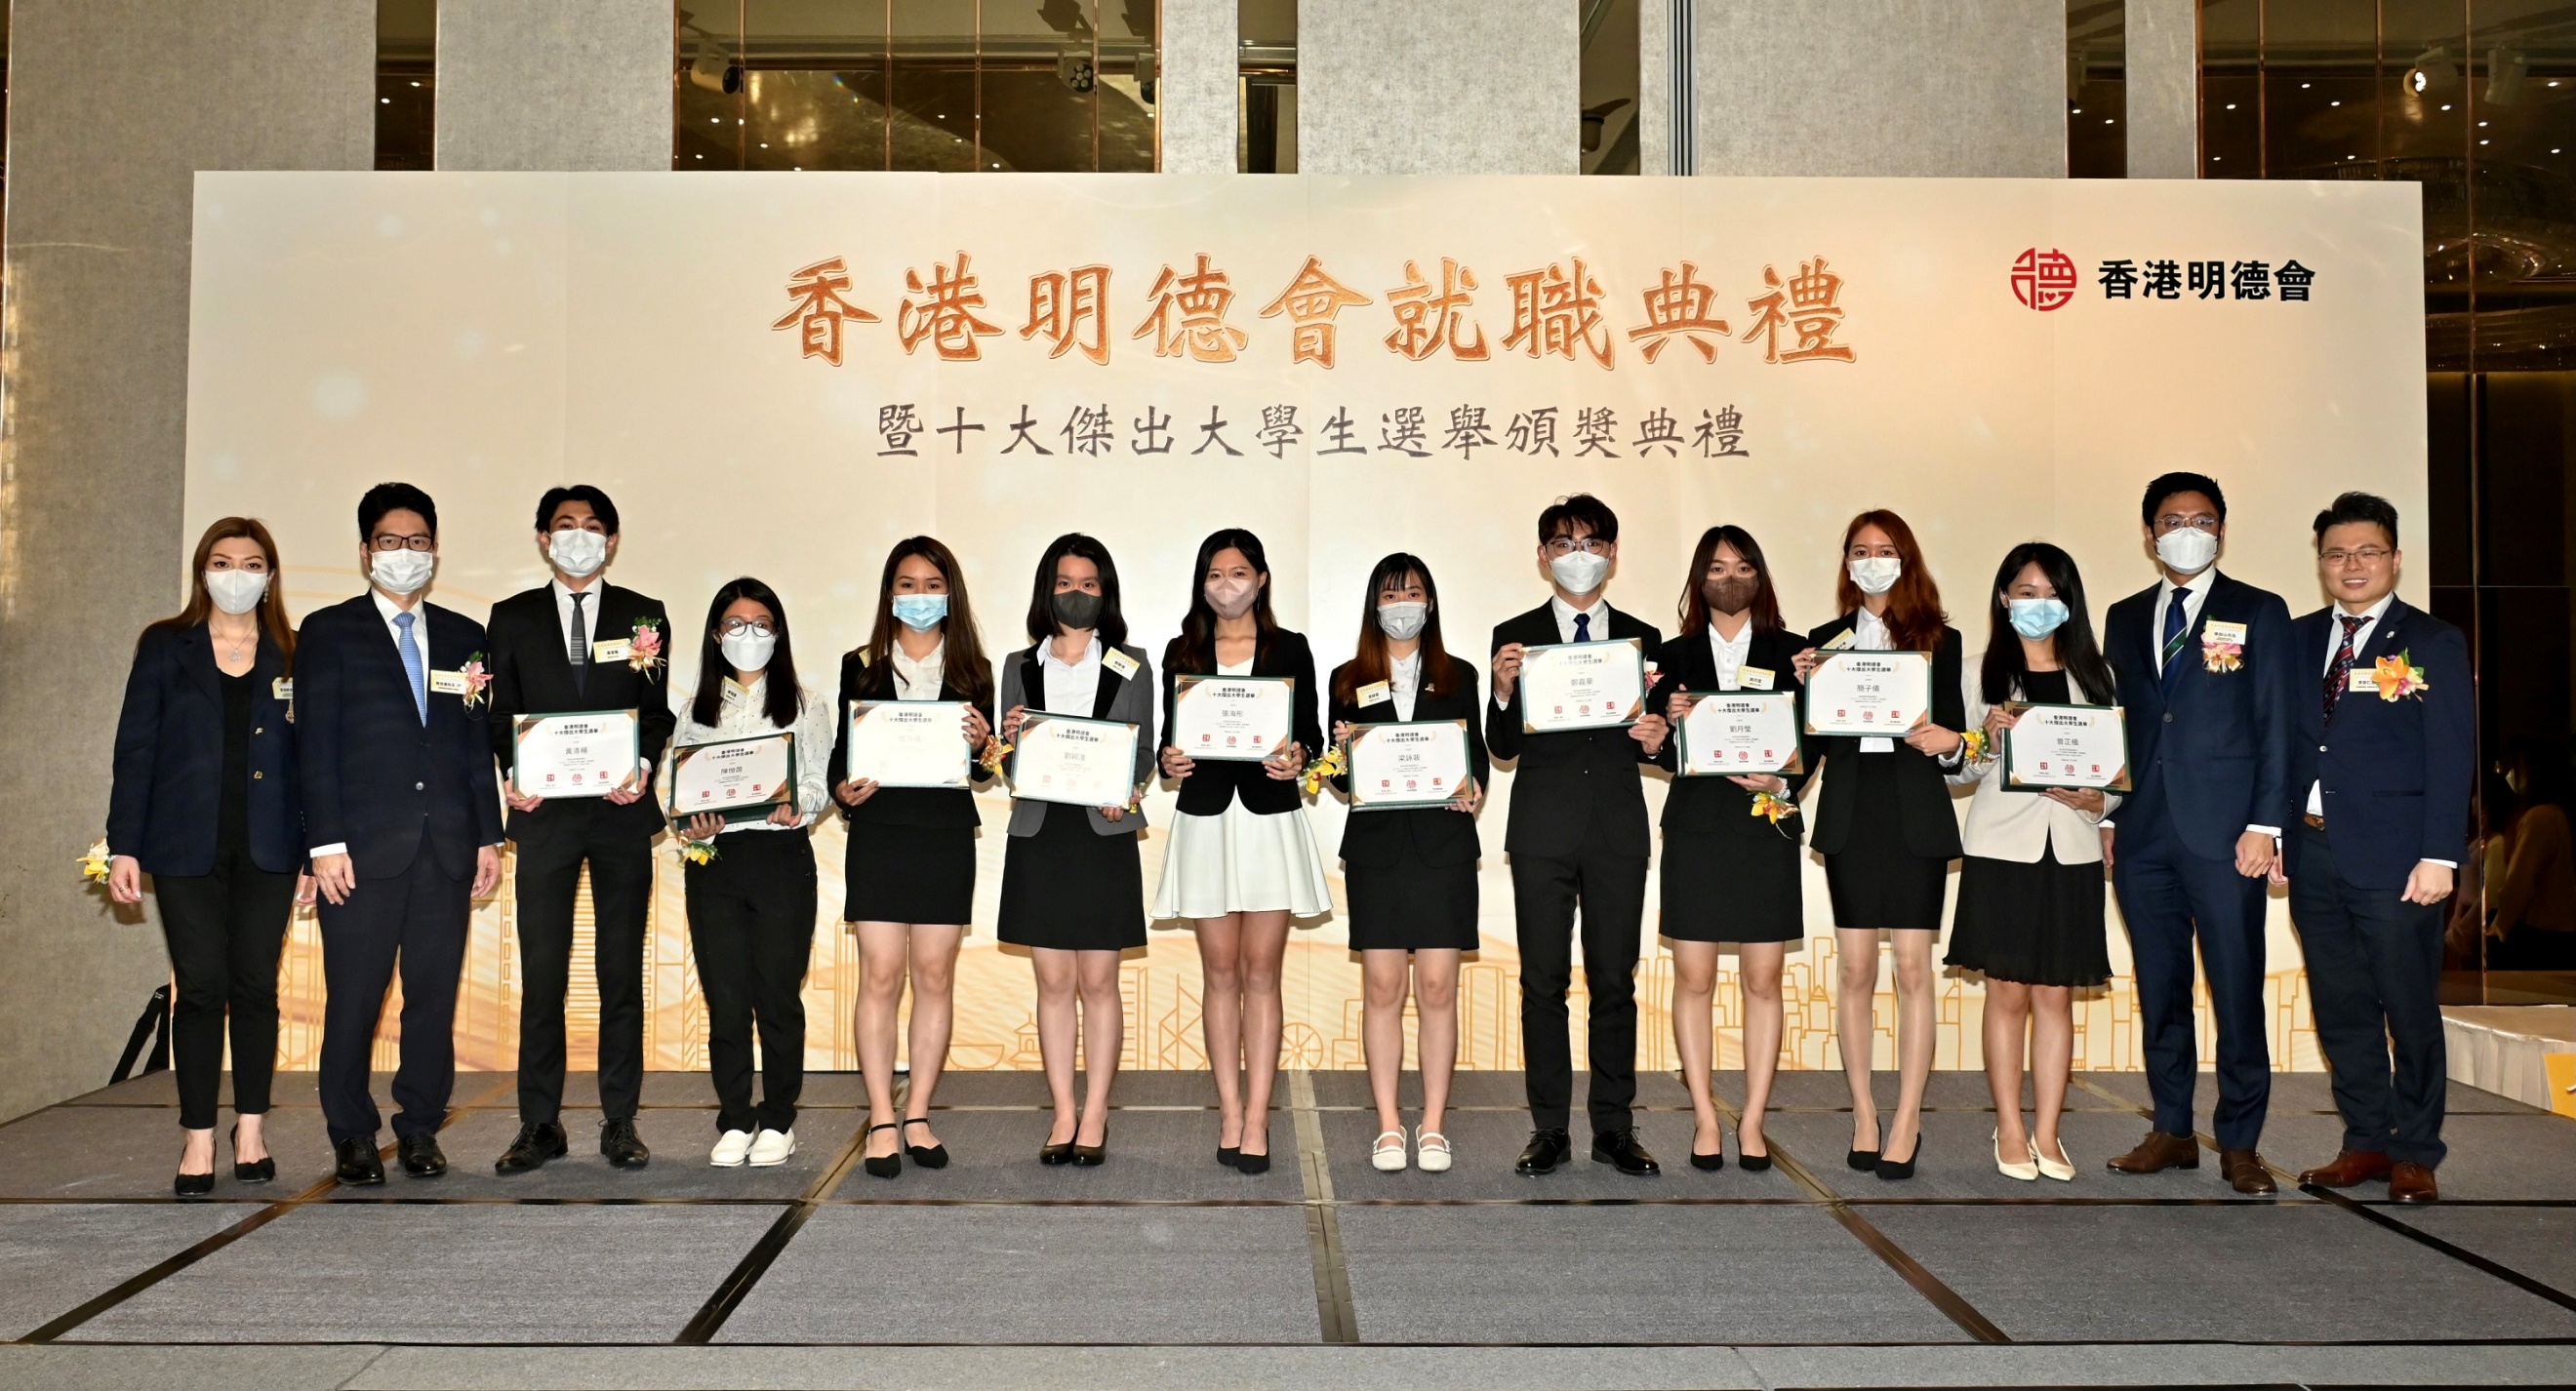 The result of “Ten Outstanding University Students Selection 2022” had been announced.